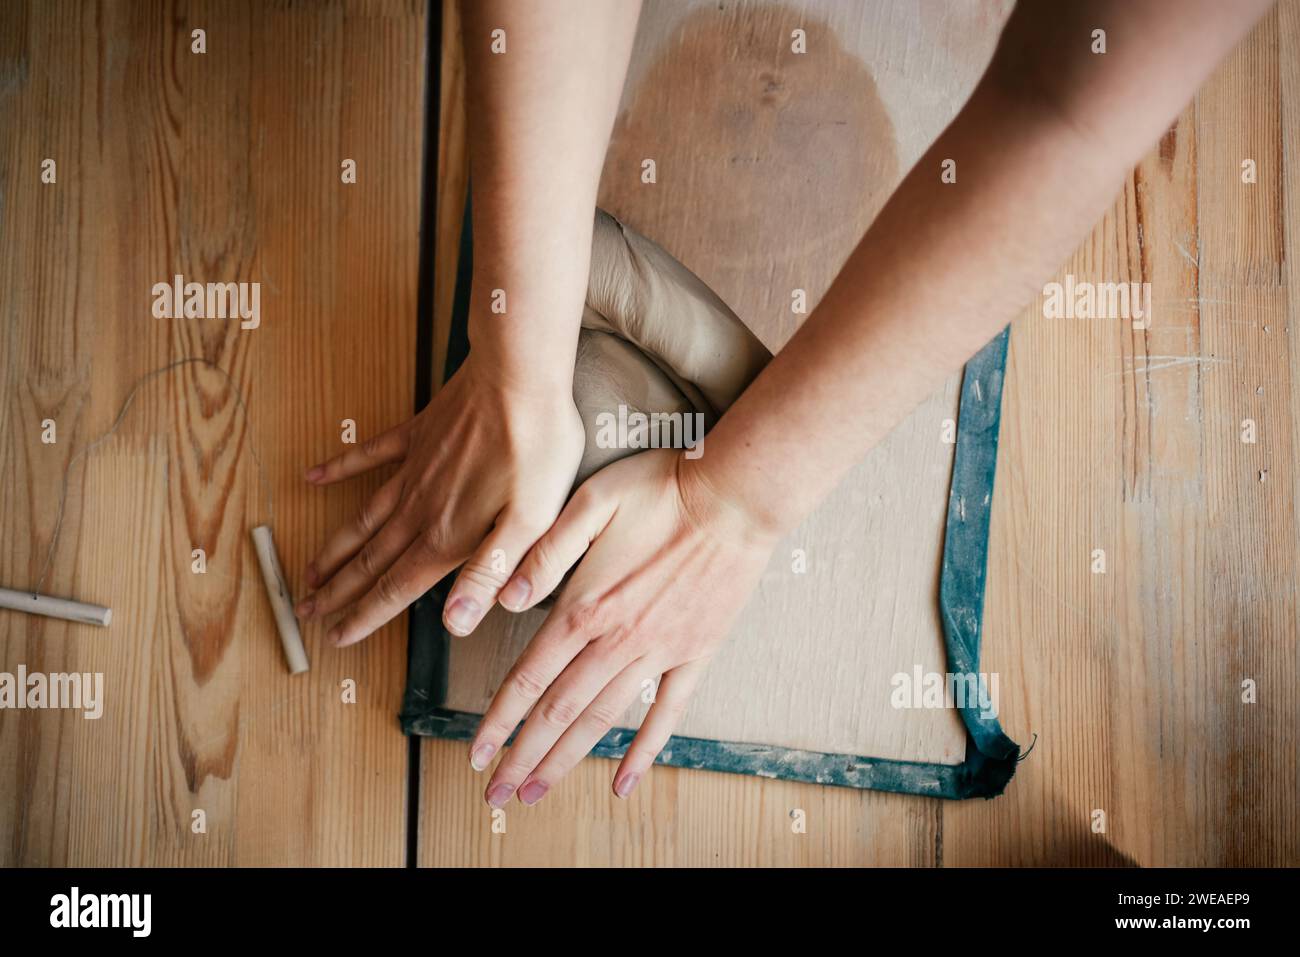 Hands of a ceramist roll out soft, raw white clay Stock Photo